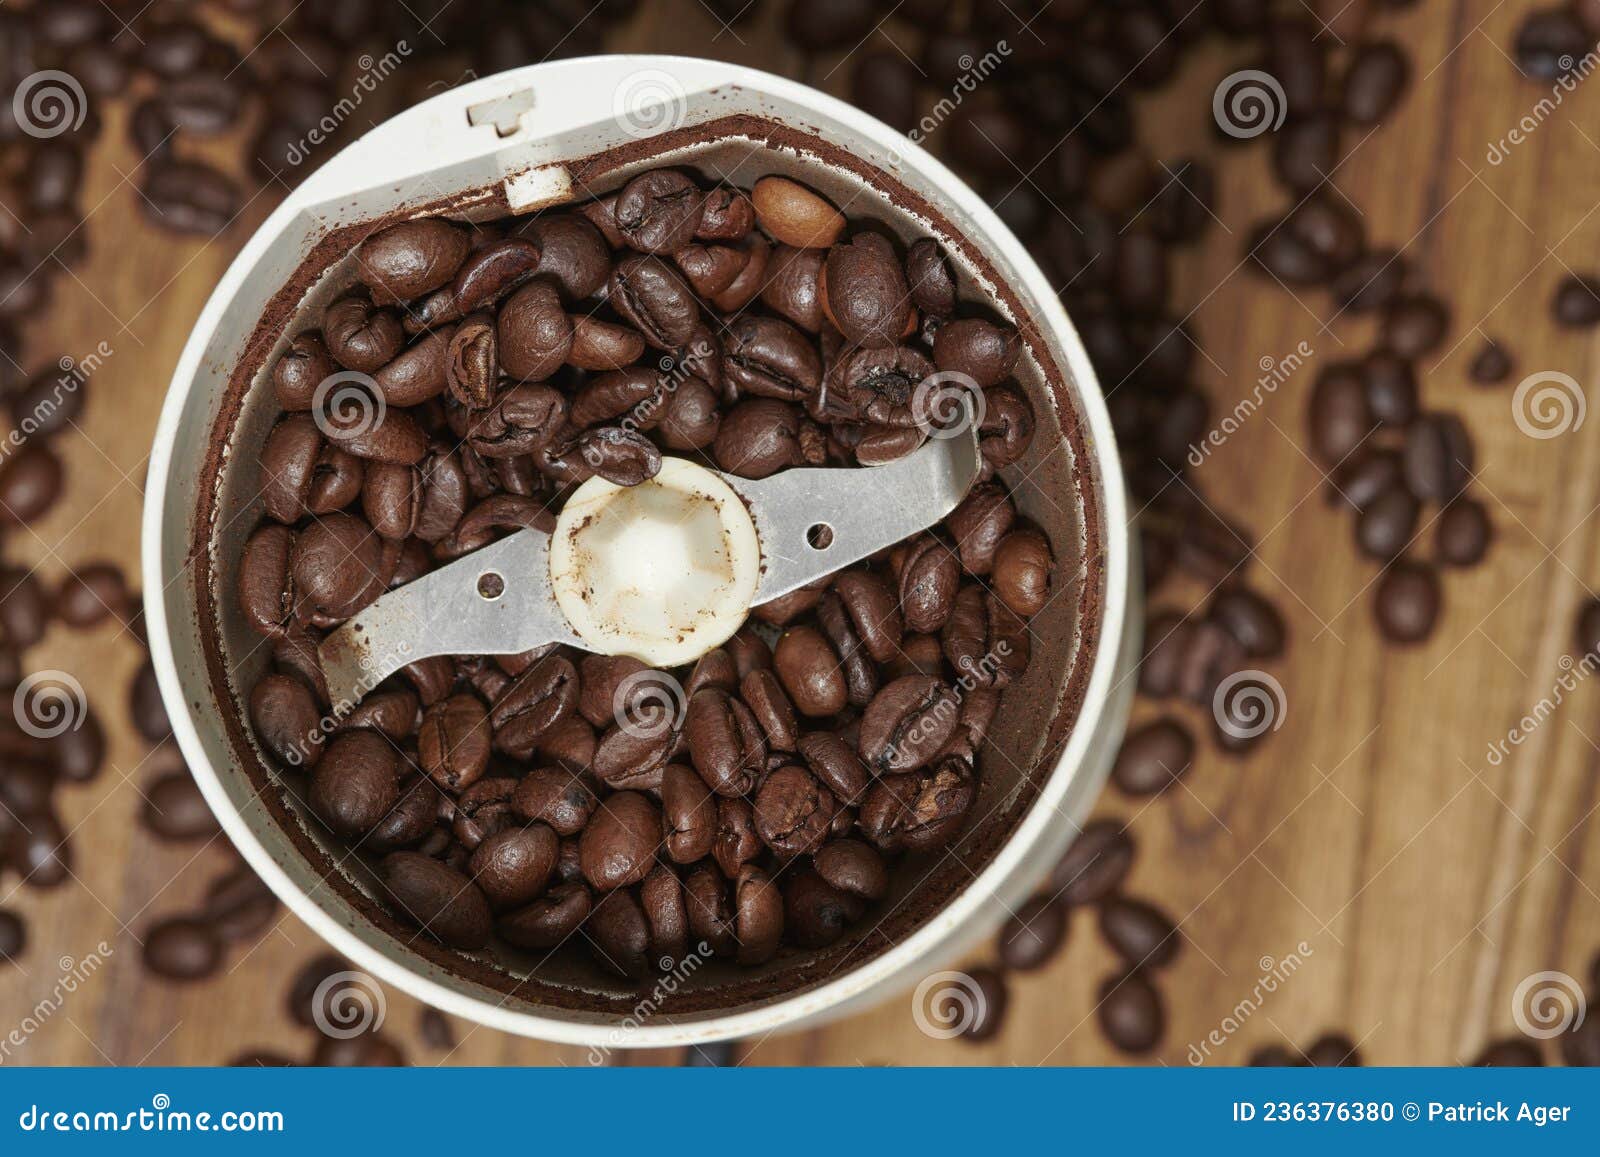 coffee beans and grinder on zebrano wood table top